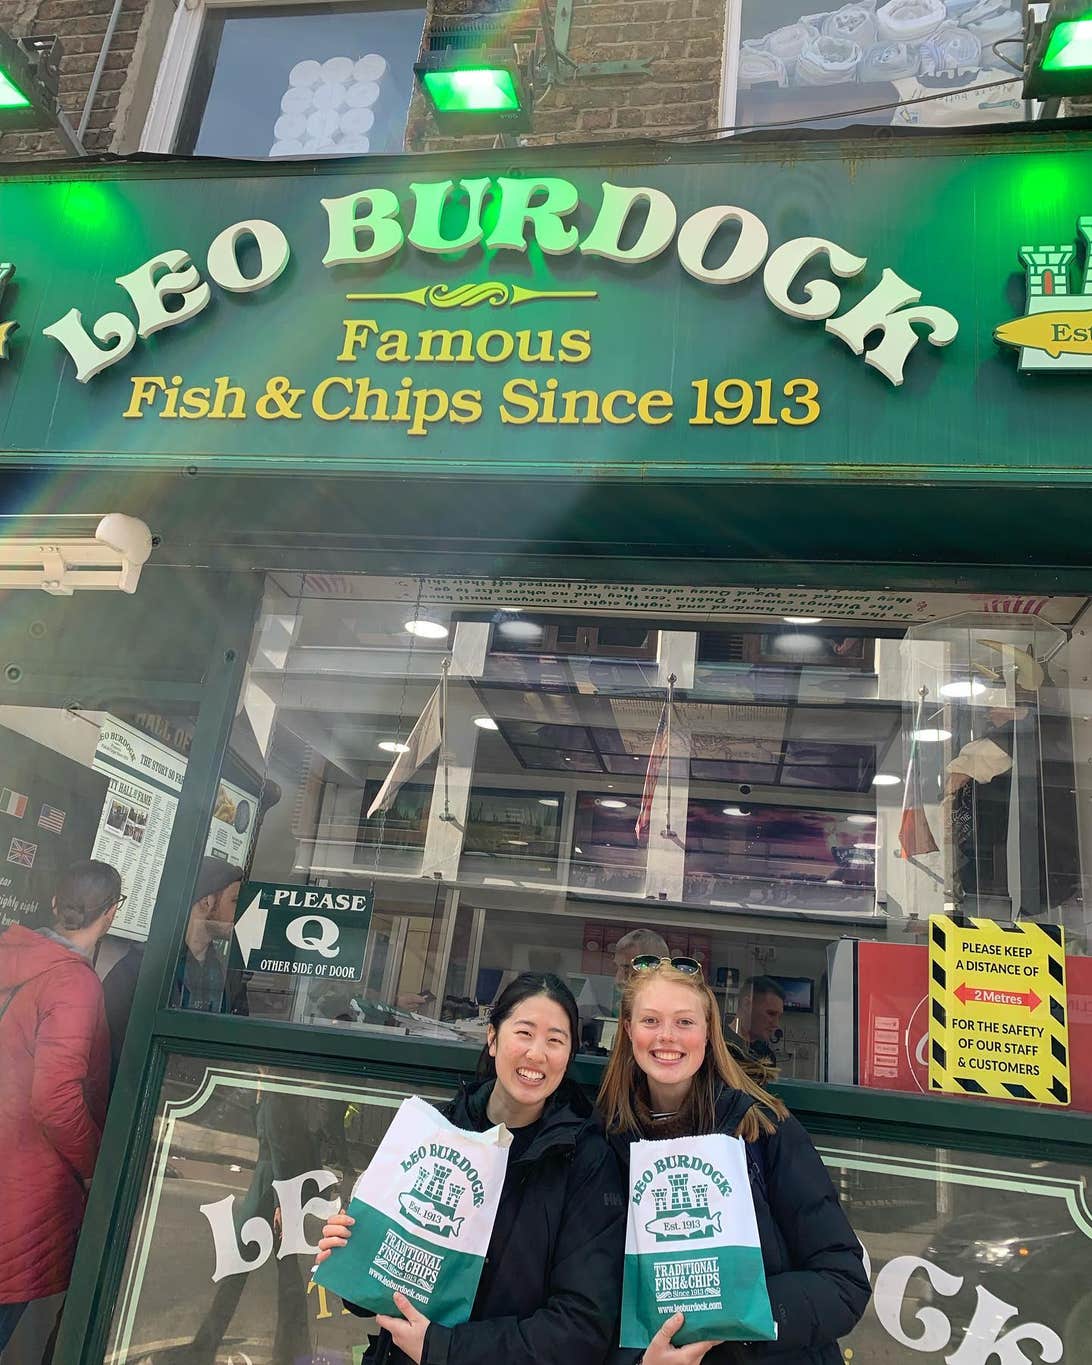 Pop into Leo Burdock, Dublin's oldest shop, for a classic portion of fish and chips. 